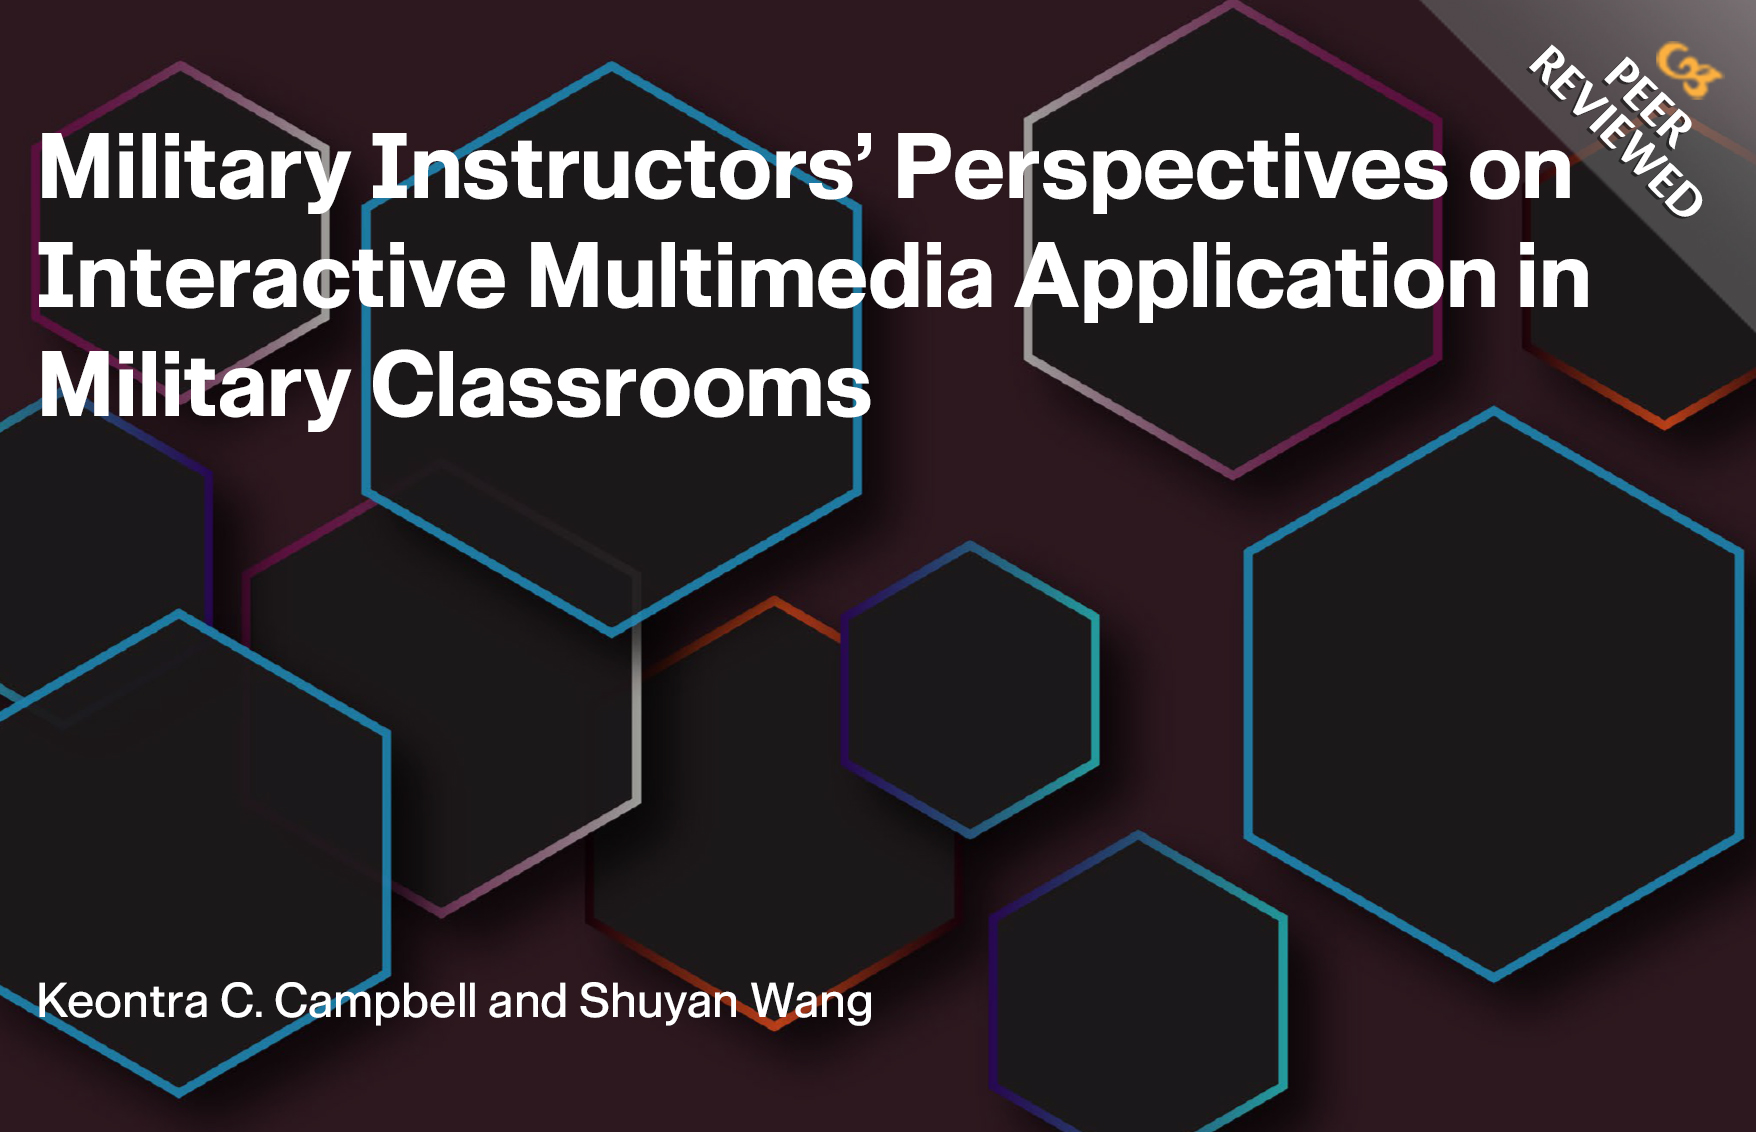 Military Instructors’ Perspectives on Interactive Multimedia Application in Military Classrooms